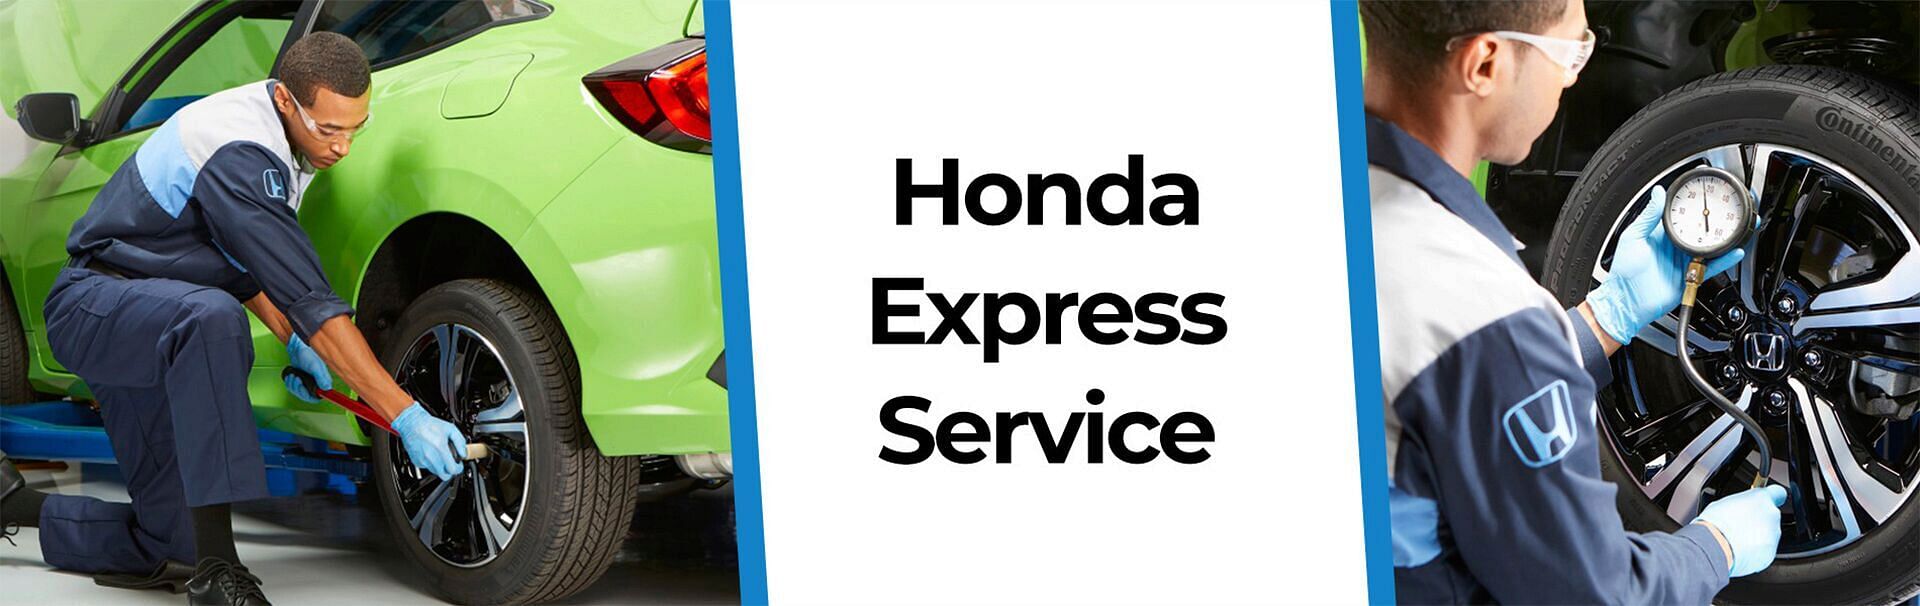 On the left, a honda service worker tightens a wheel on a green honda; on the right, a honda service worker checks tire pressure; in the center, a text honda express service on a white background